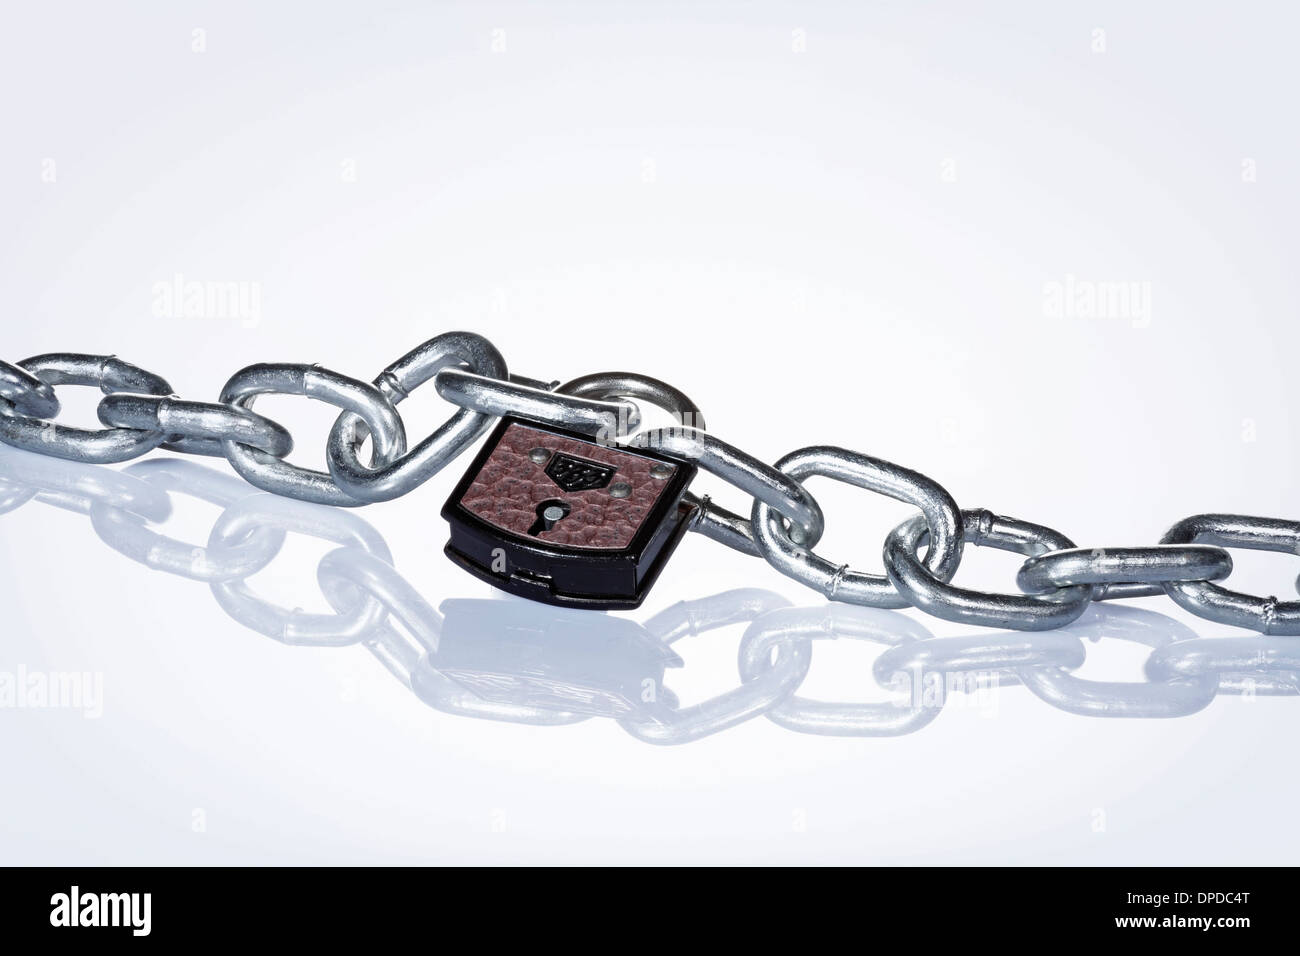 Chain with padlock against white background Stock Photo